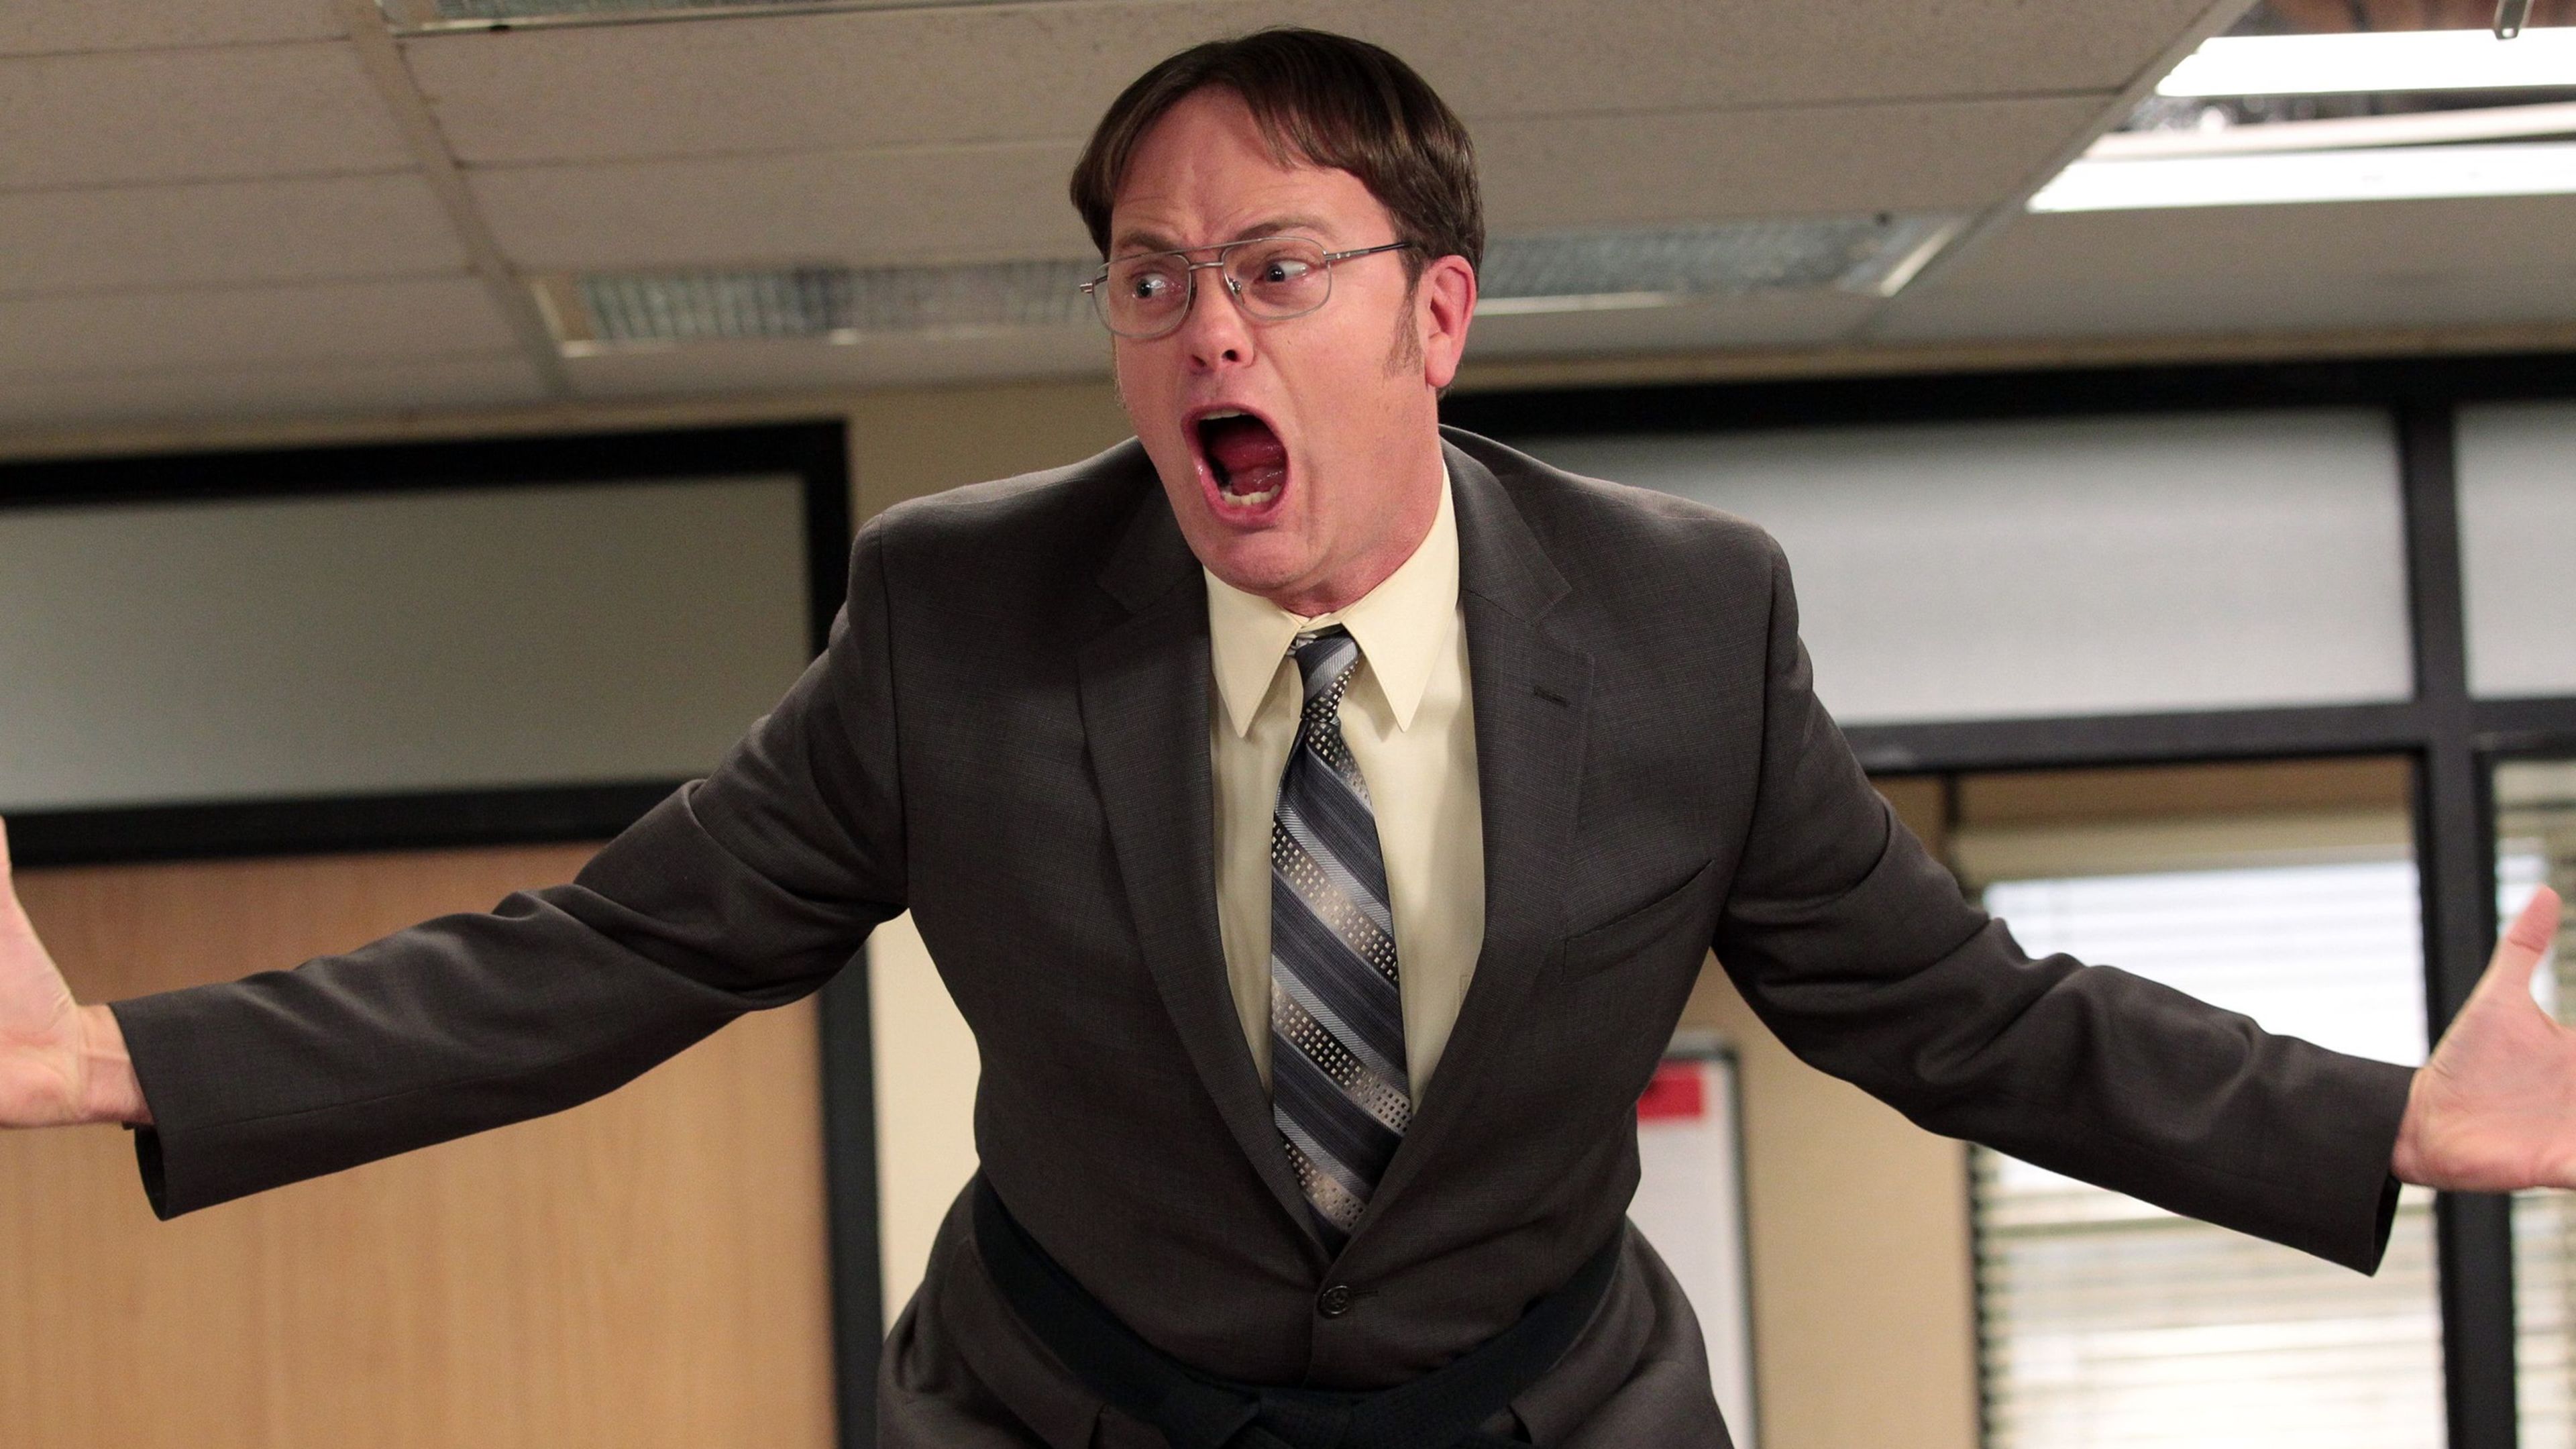 The Office - Dwight Schrute